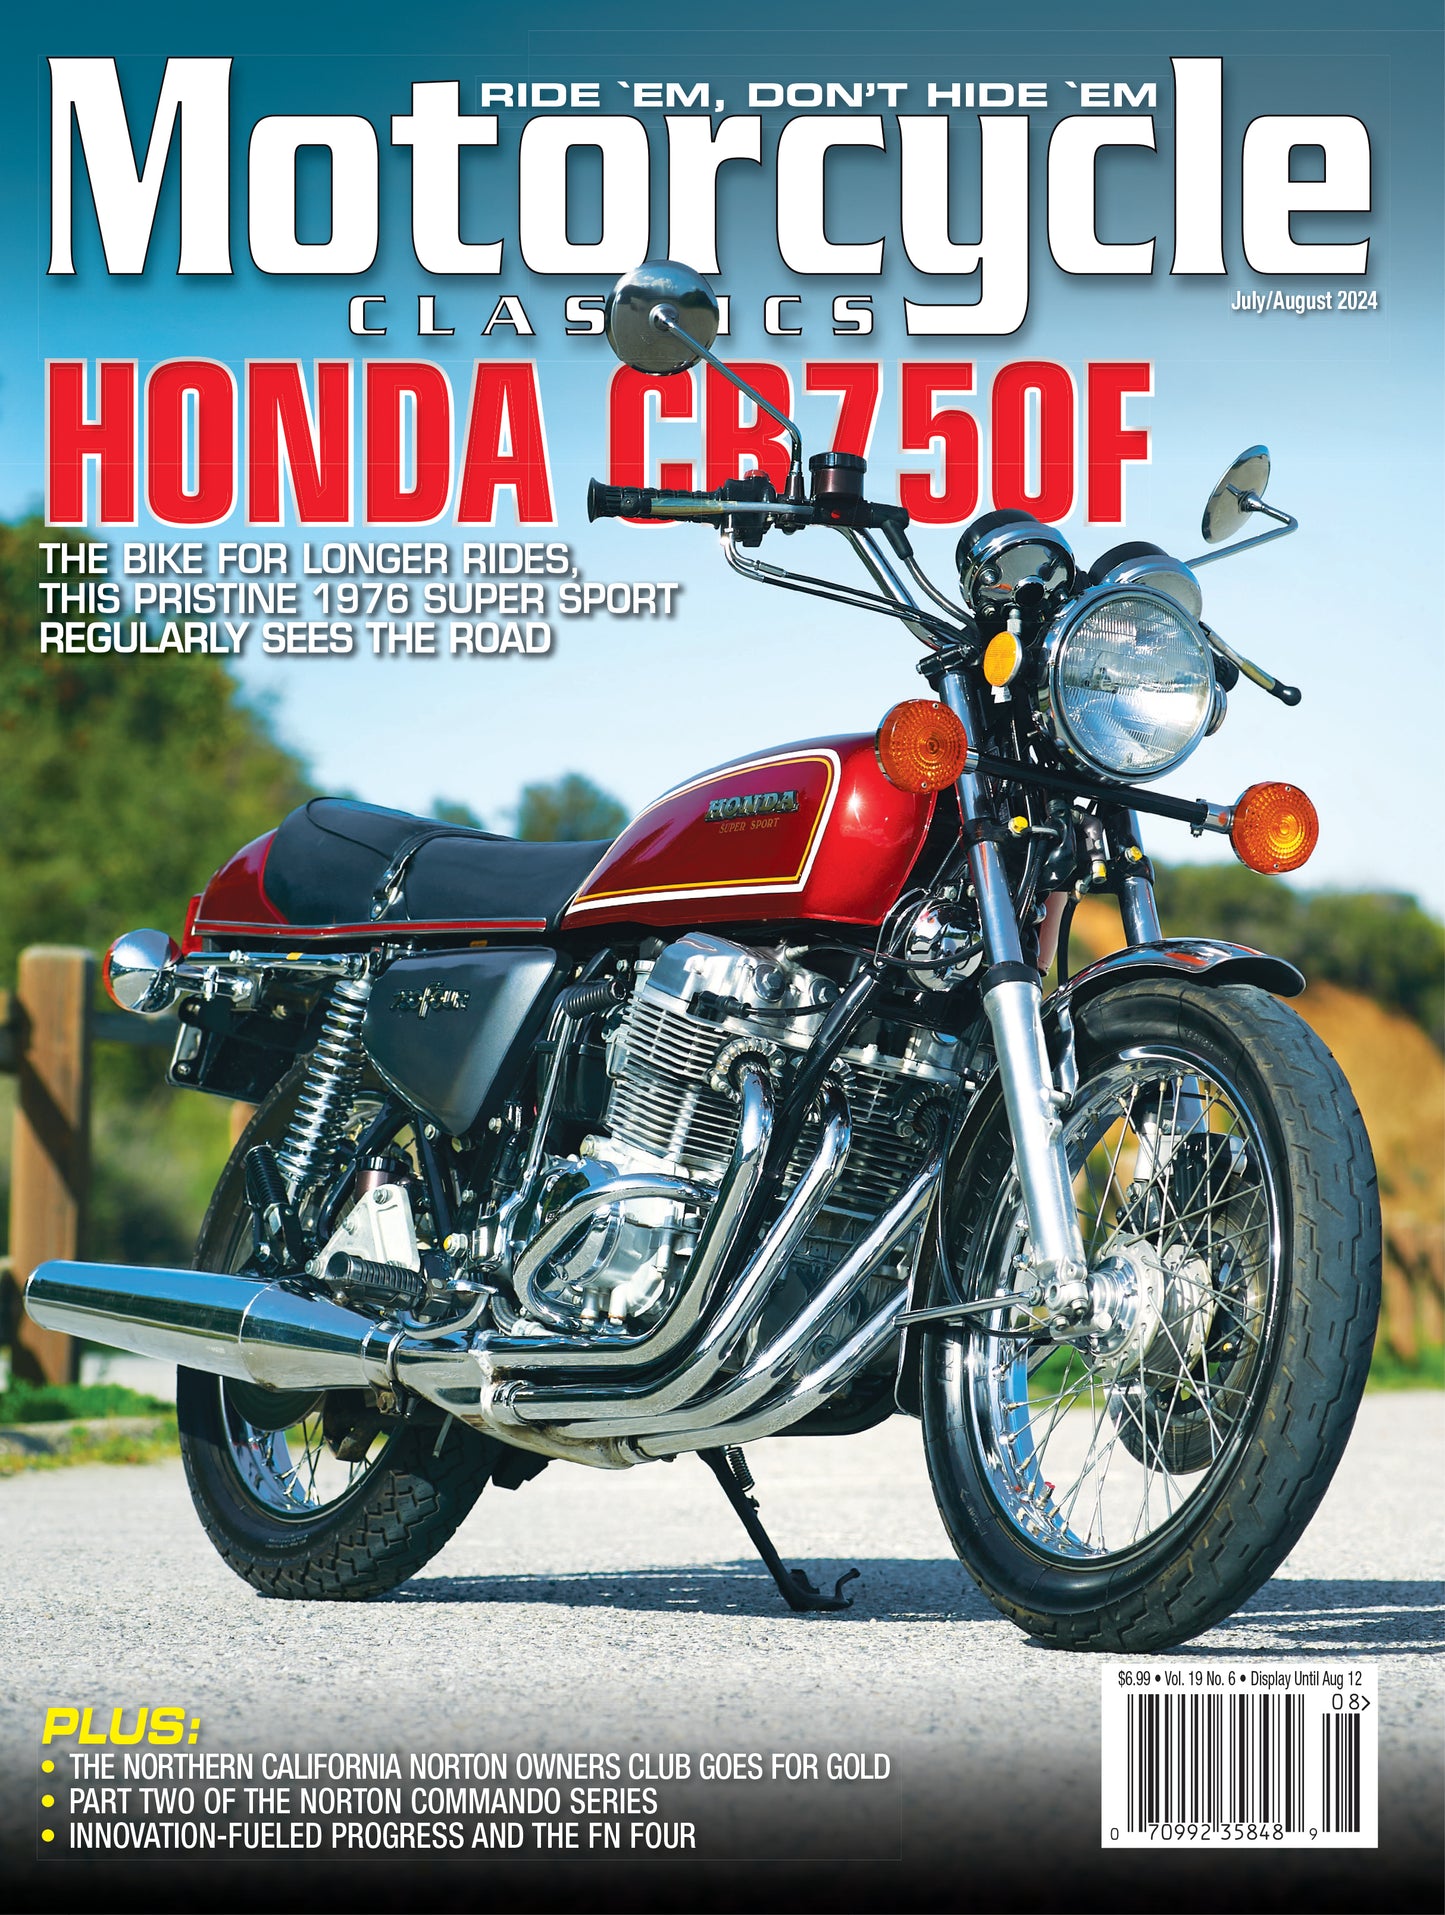 MOTORCYCLE CLASSICS MAGAZINE, JULY/AUGUST 2024